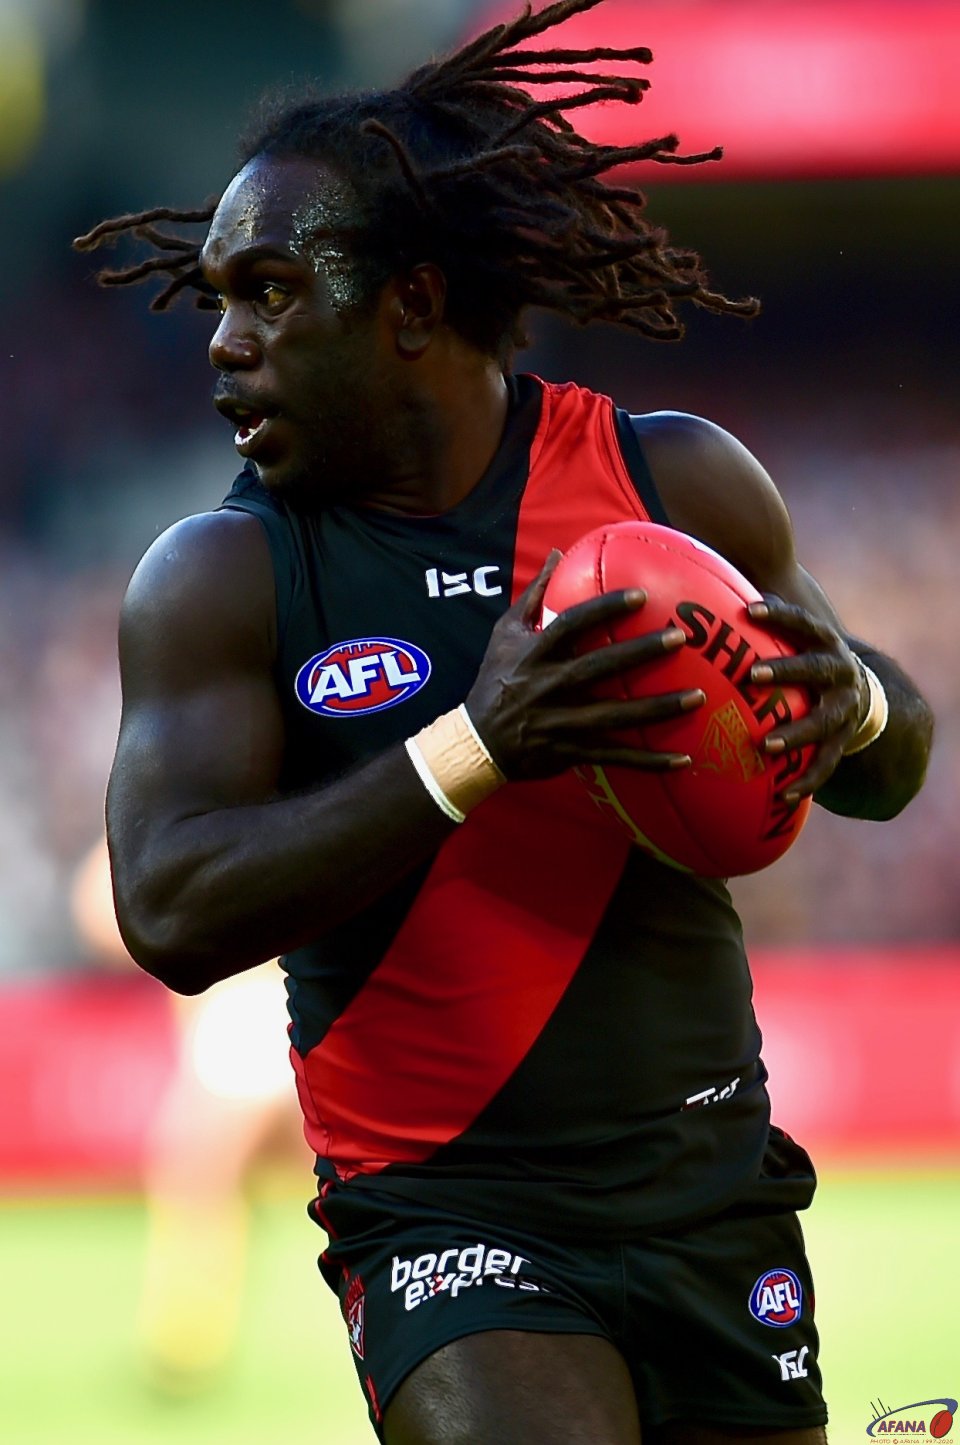 Anthony McDonald-Tipungwuti has a run on the wing.